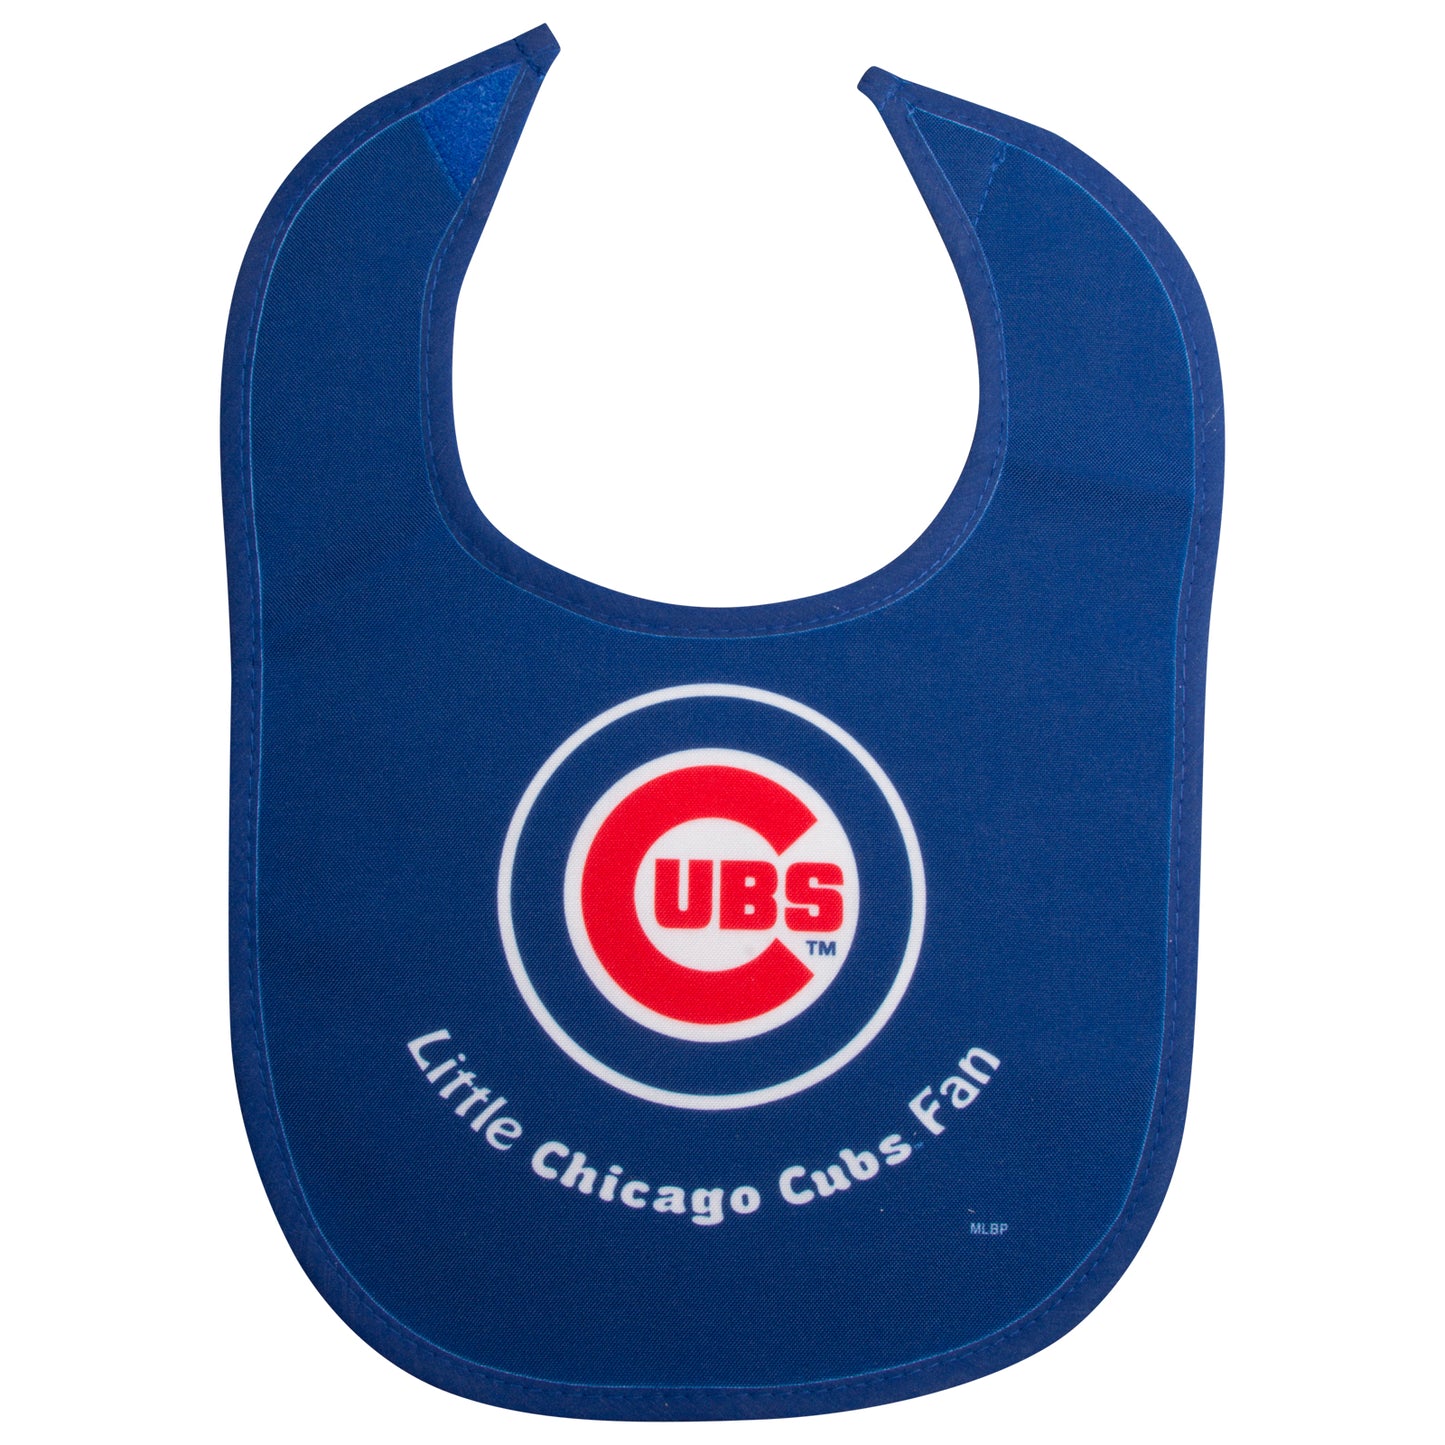 Chicago Cubs Royal "Little Chicago Cubs Fan" Baby Bib